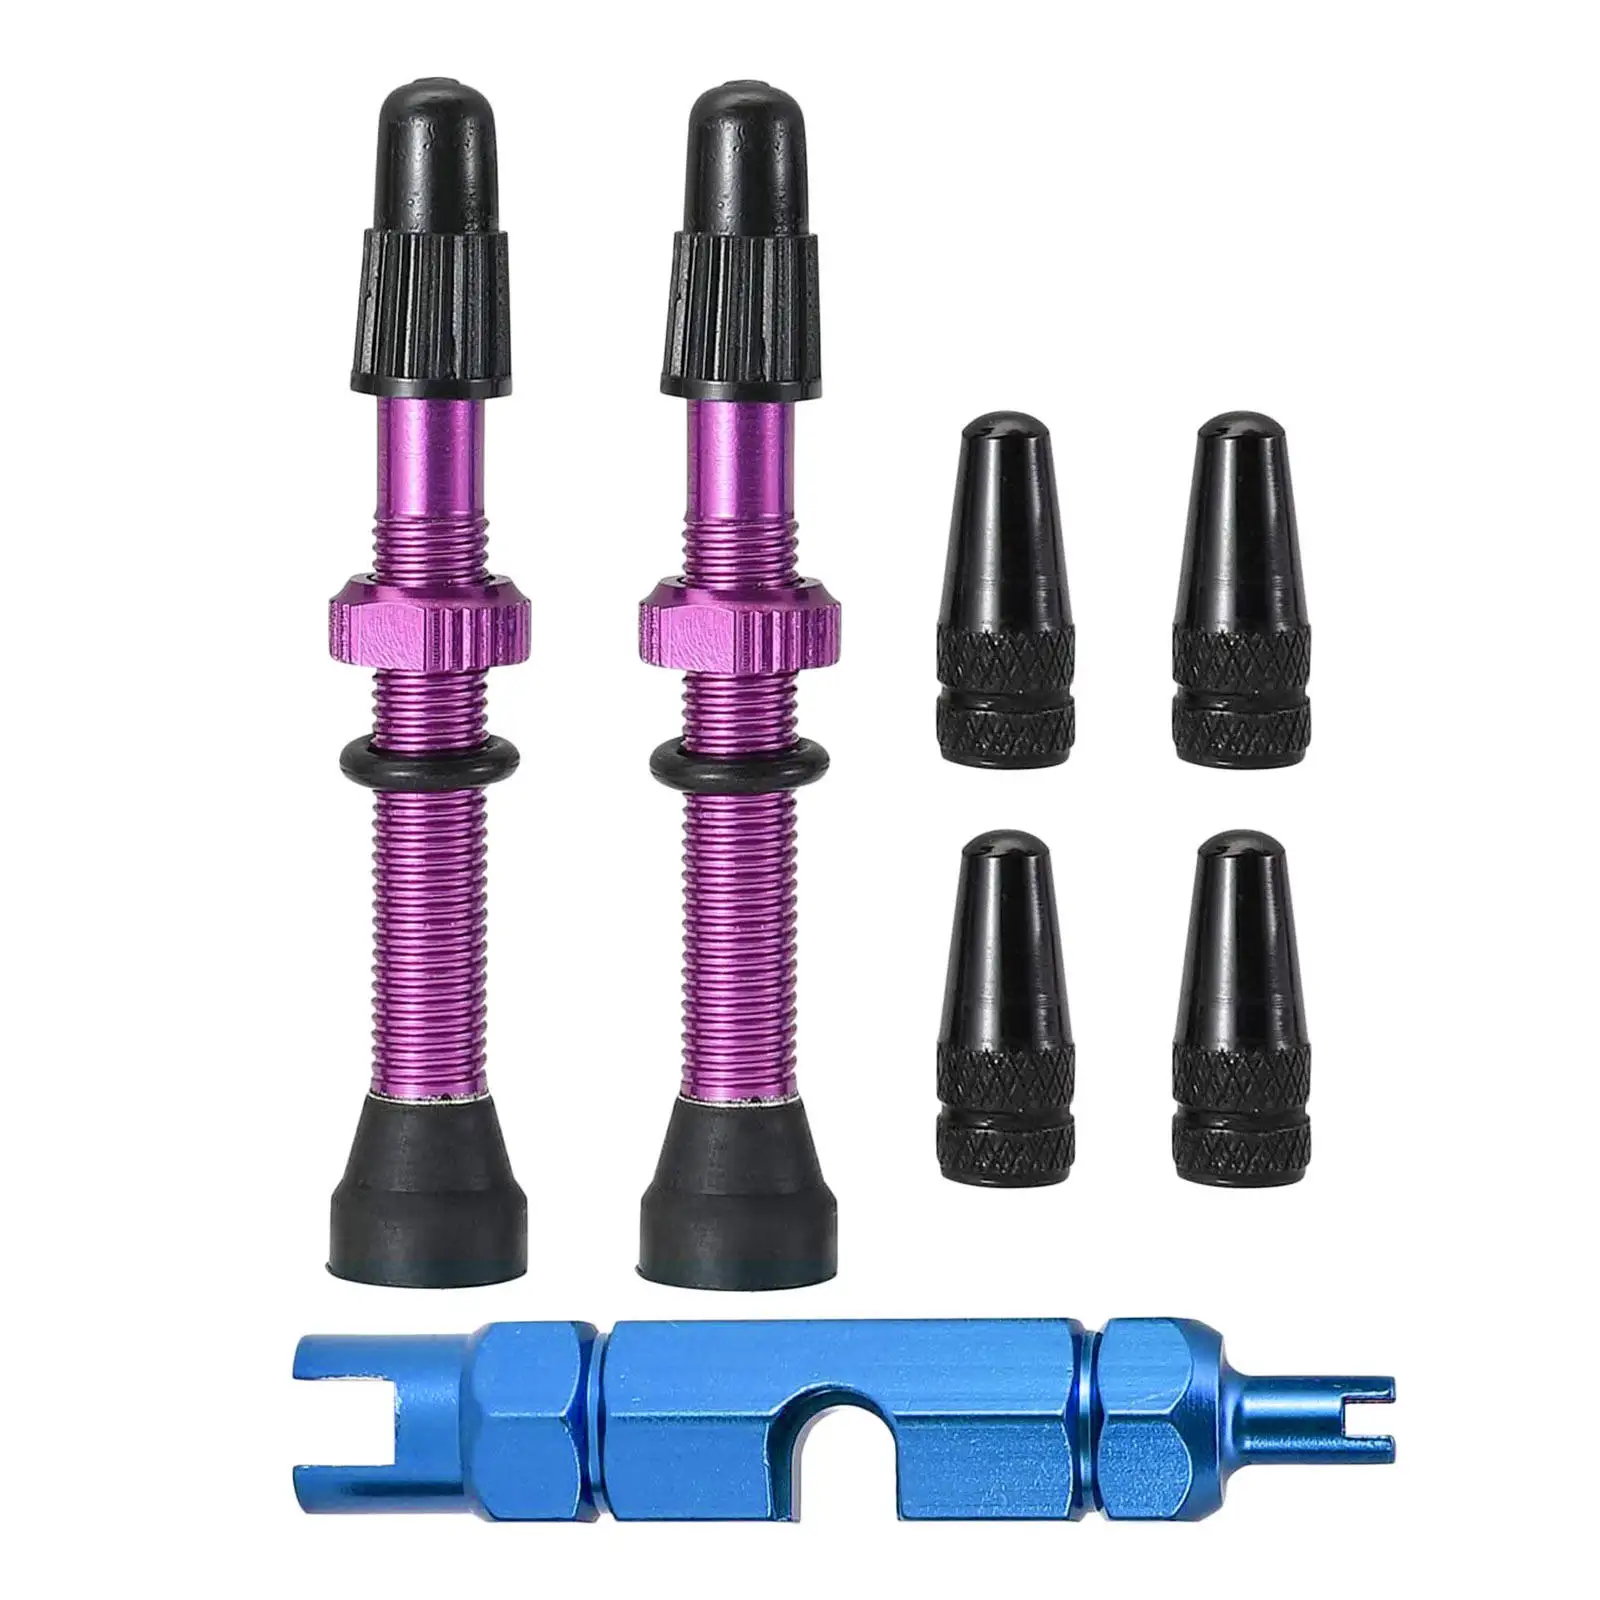 Aluminum Alloy Bike Valve Core with Removal Tool Tool MTB Mountain Road Bicycle Accessories